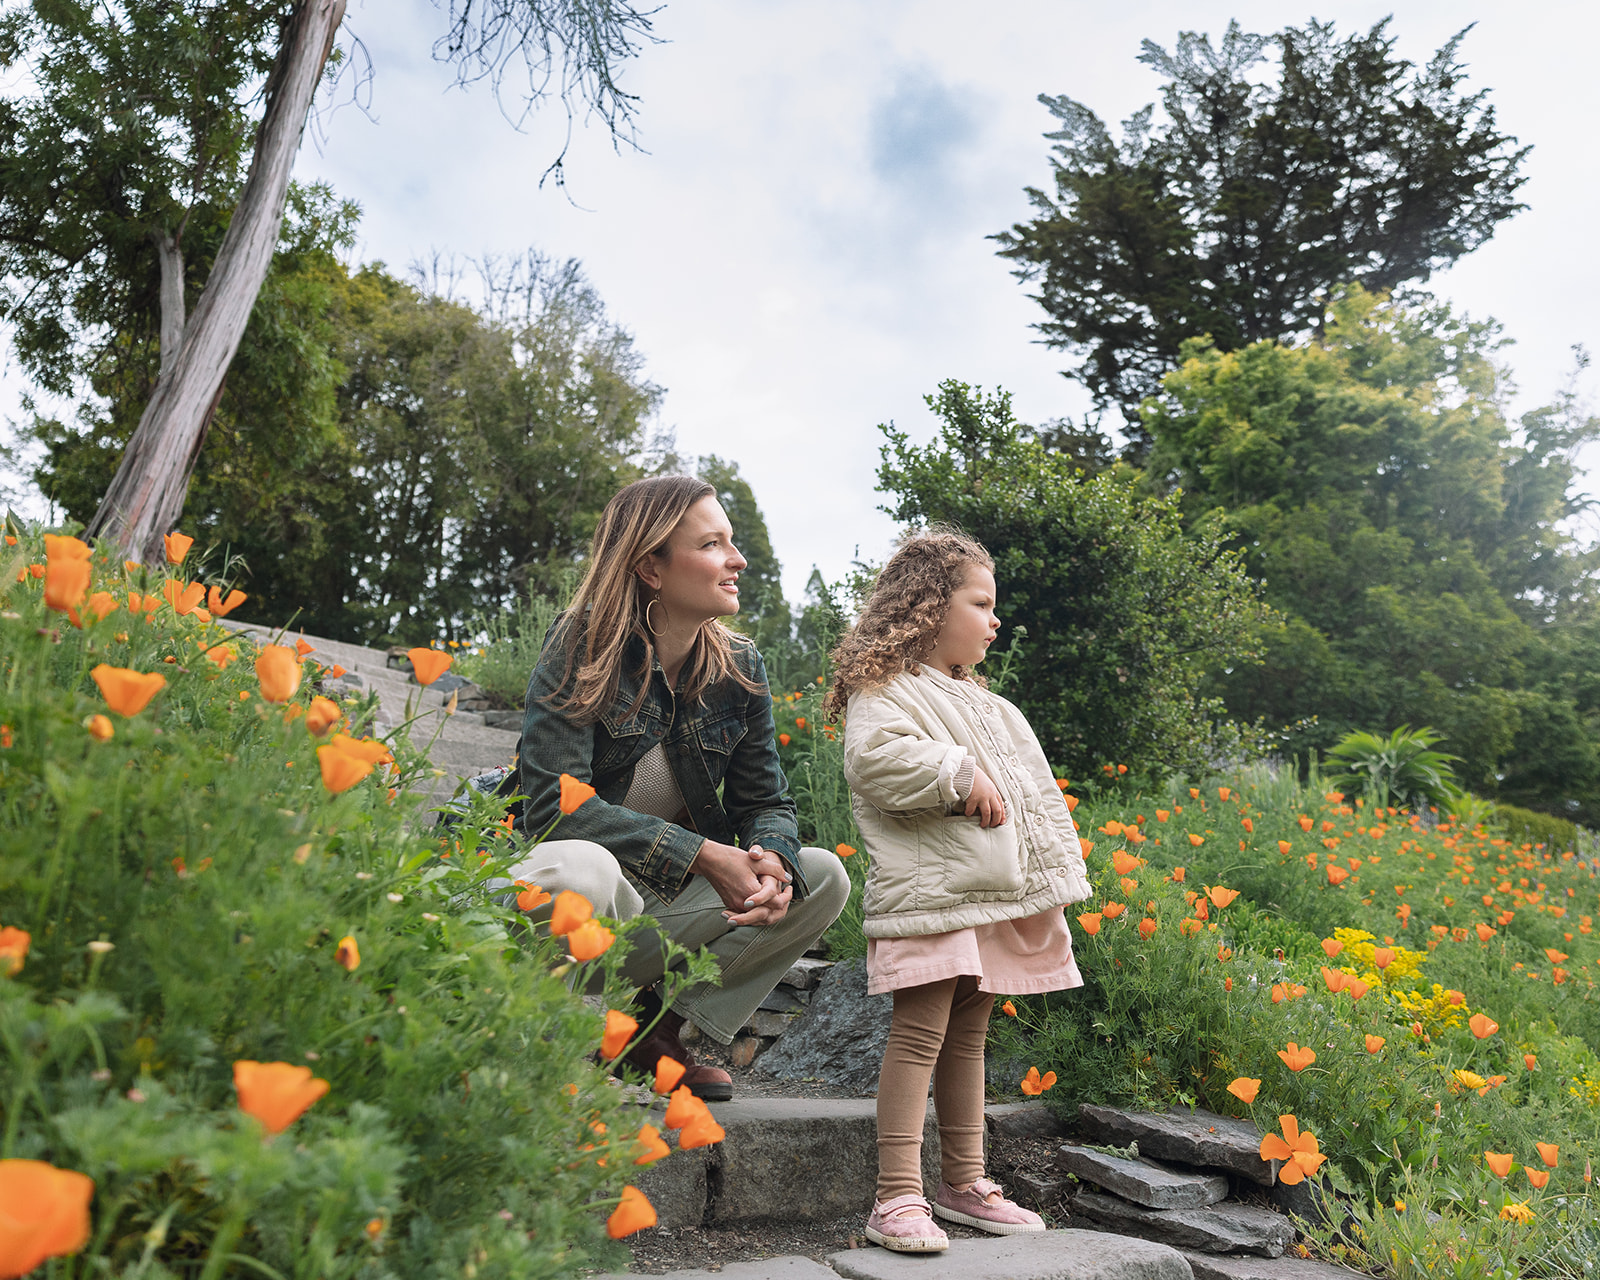 Mother and daughter enjoying the flowers at Blake Garden in Kensington - Top East Bay Area Photography Locations For Family Photos 